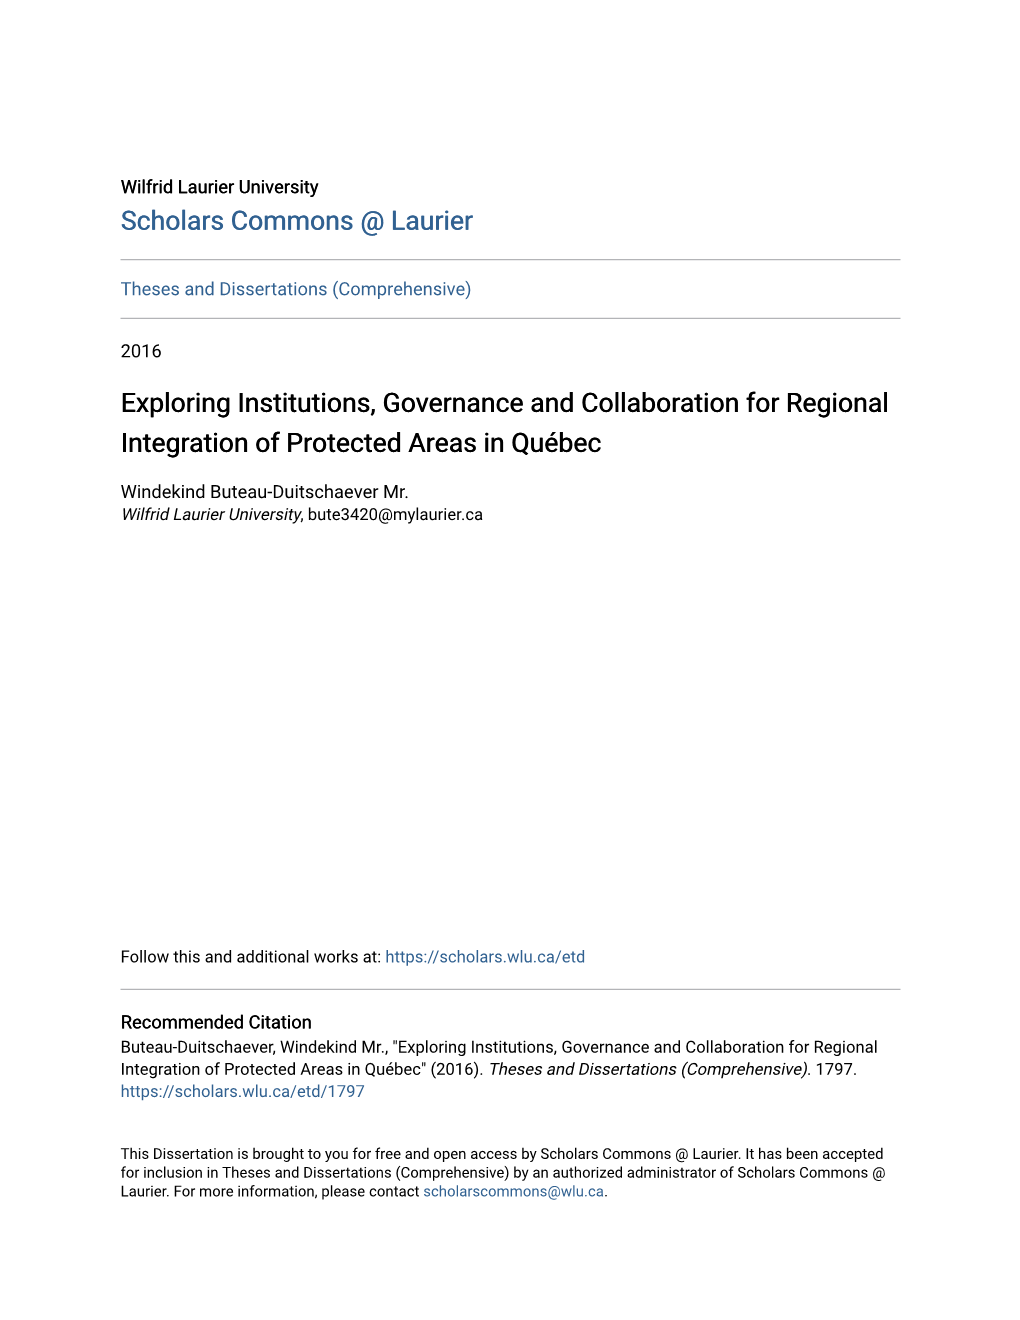 Exploring Institutions, Governance and Collaboration for Regional Integration of Protected Areas in Québec